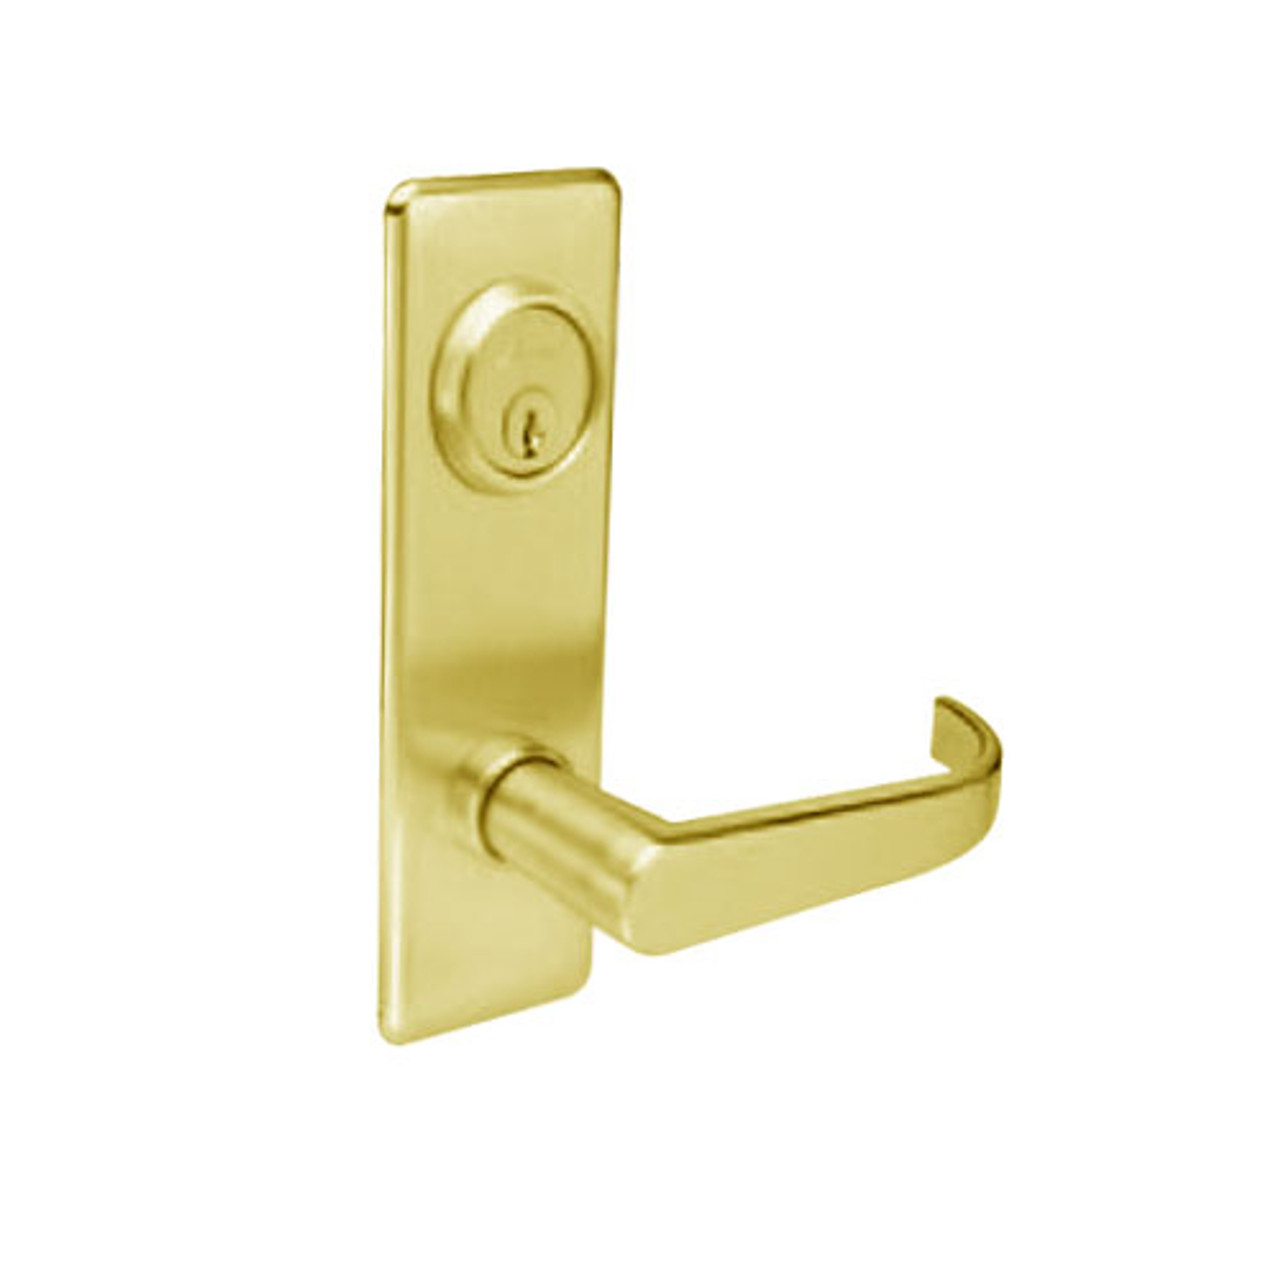 BM38-BRG-03 Arrow Mortise Lock BM Series Classroom Security Lever with Broadway Design and G Escutcheon in Bright Brass